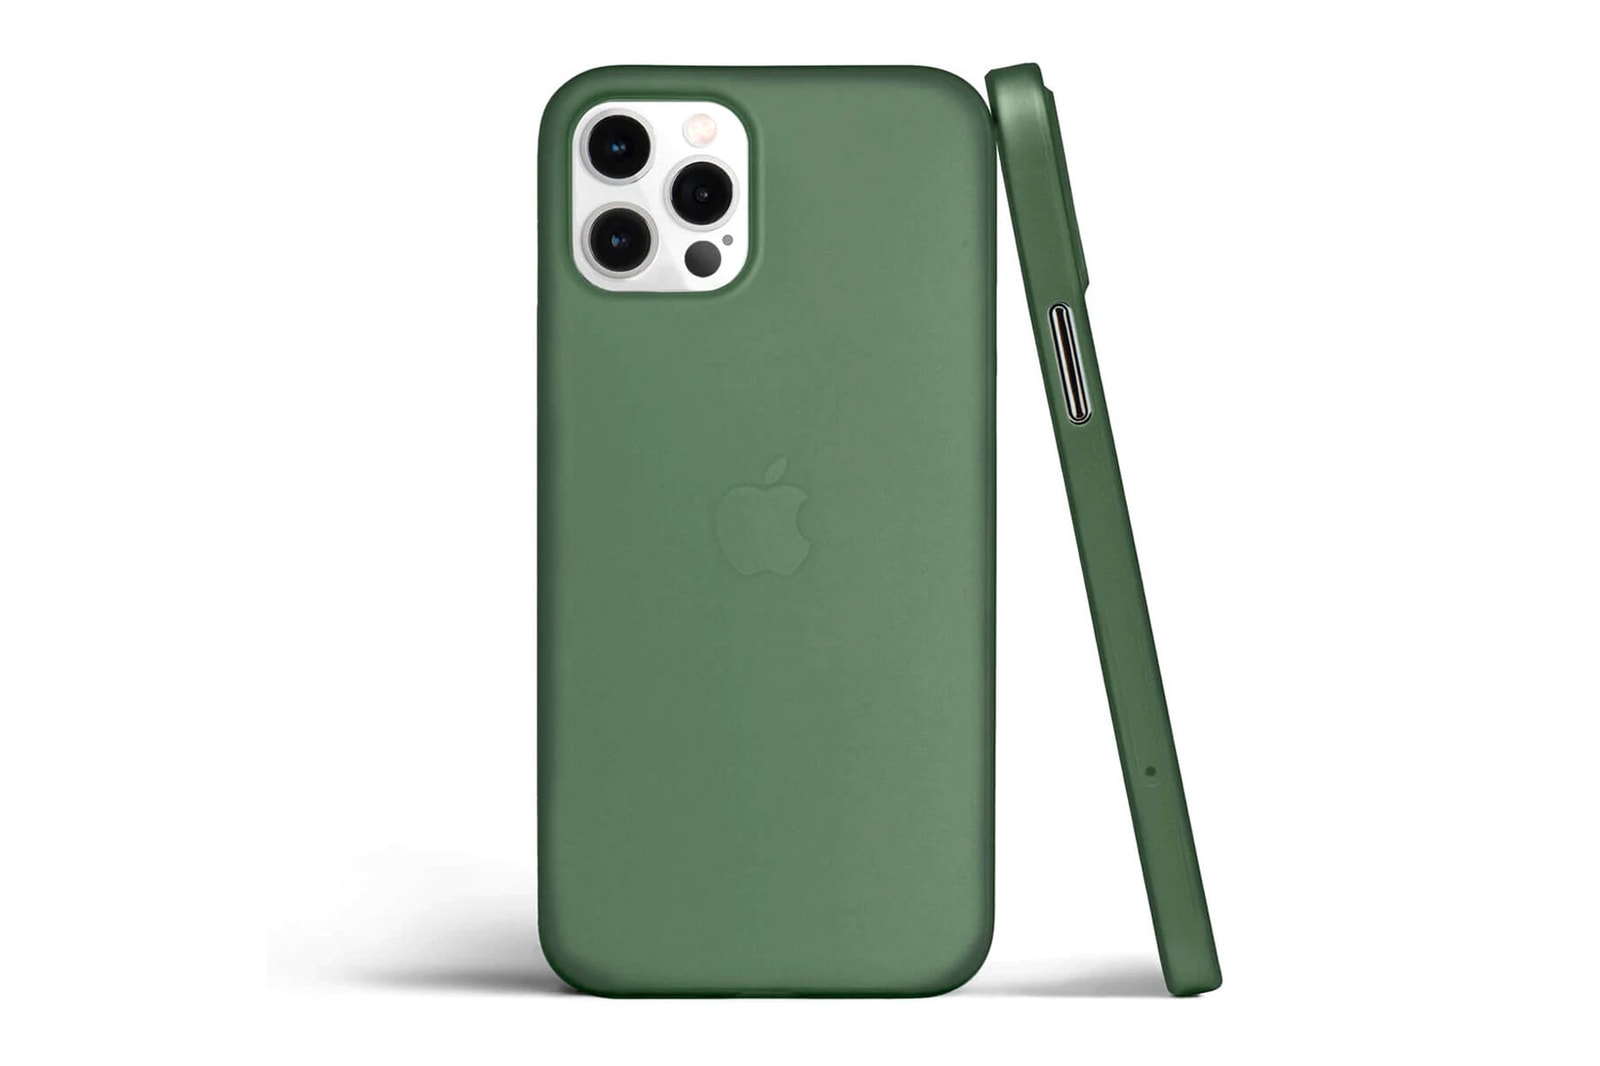 best apple iphone 12 pro max mini cases protection shockproof customizable eco-friendly casetify speck